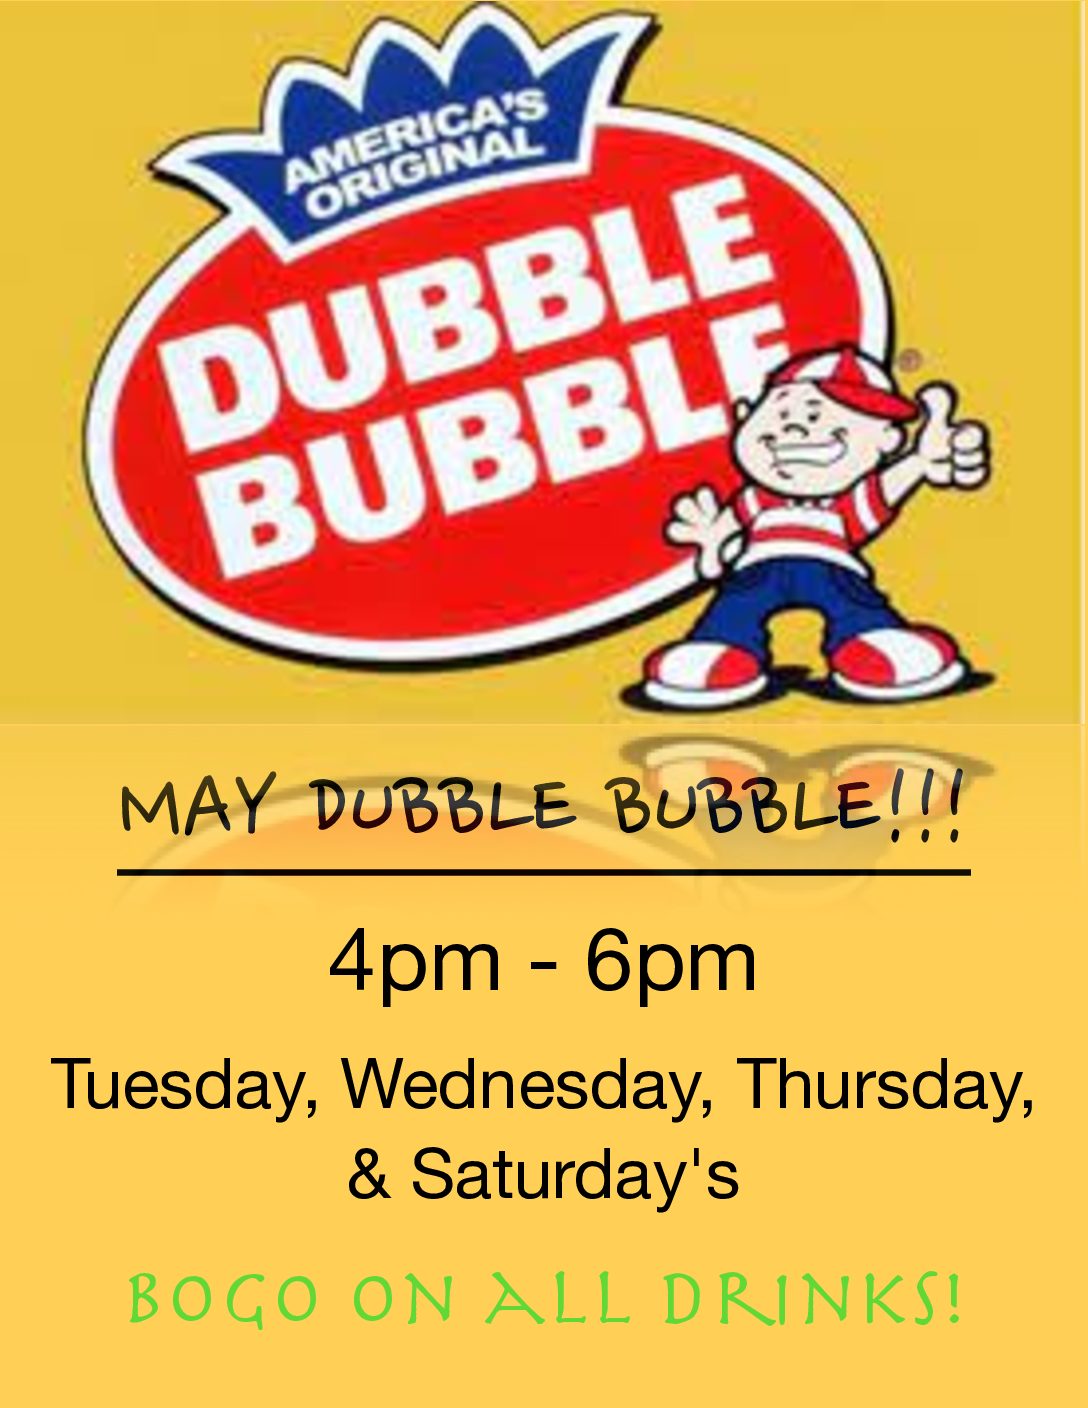 Dubble Bubble during the month of May